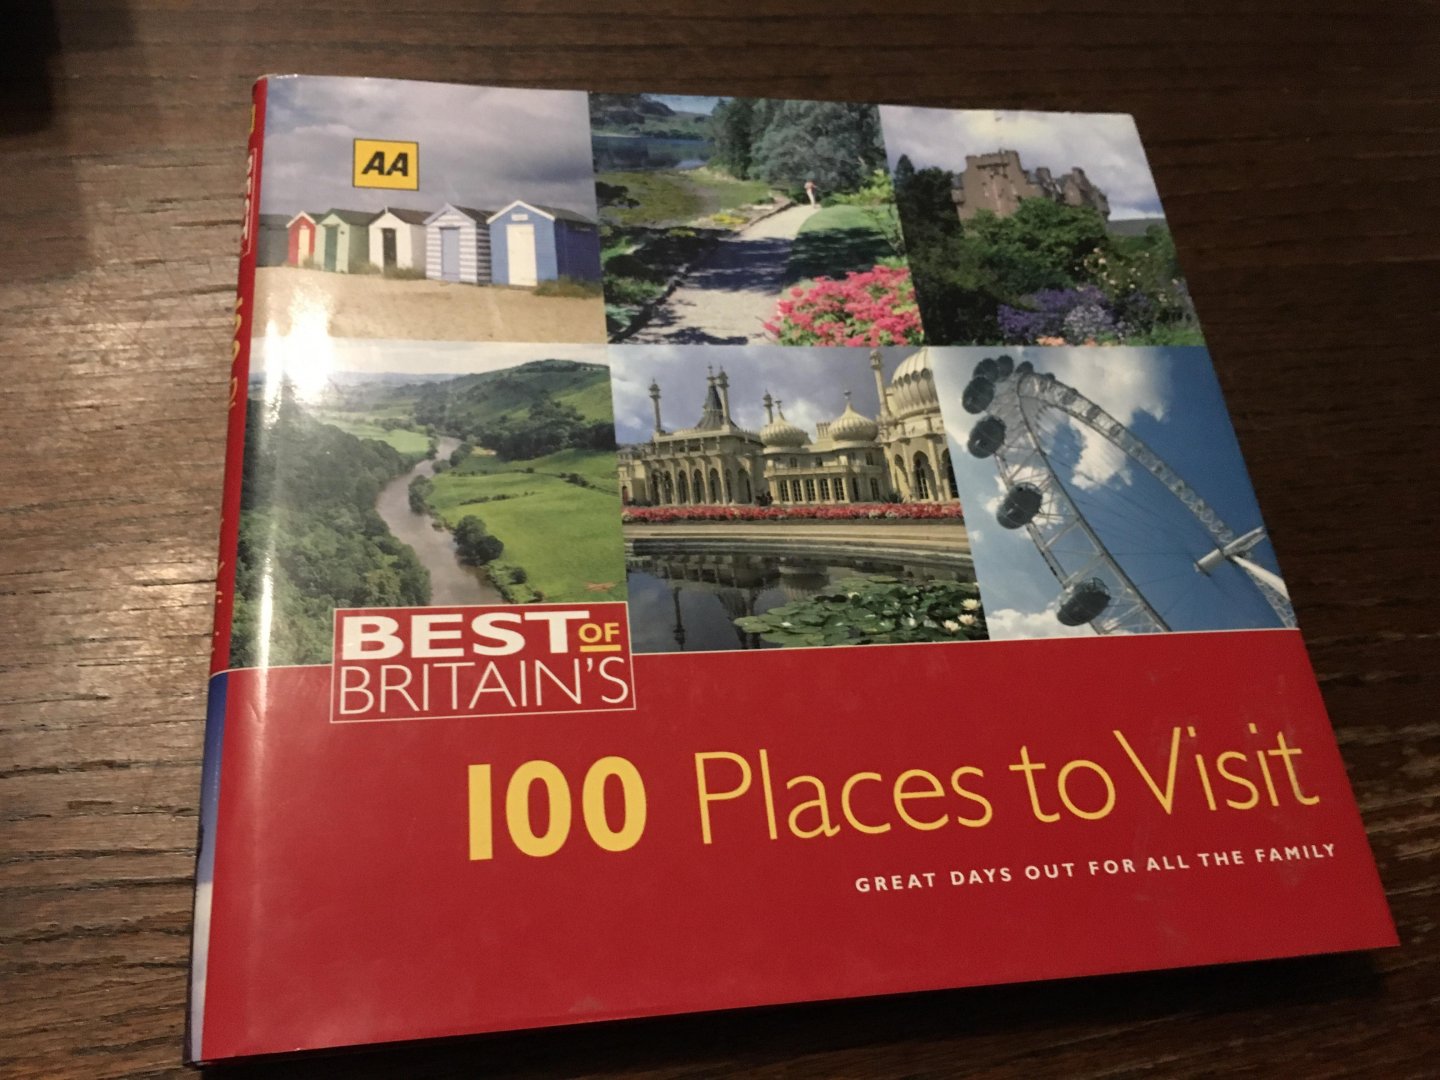  - Aa The Best Of Britain's 100 Places To Visit